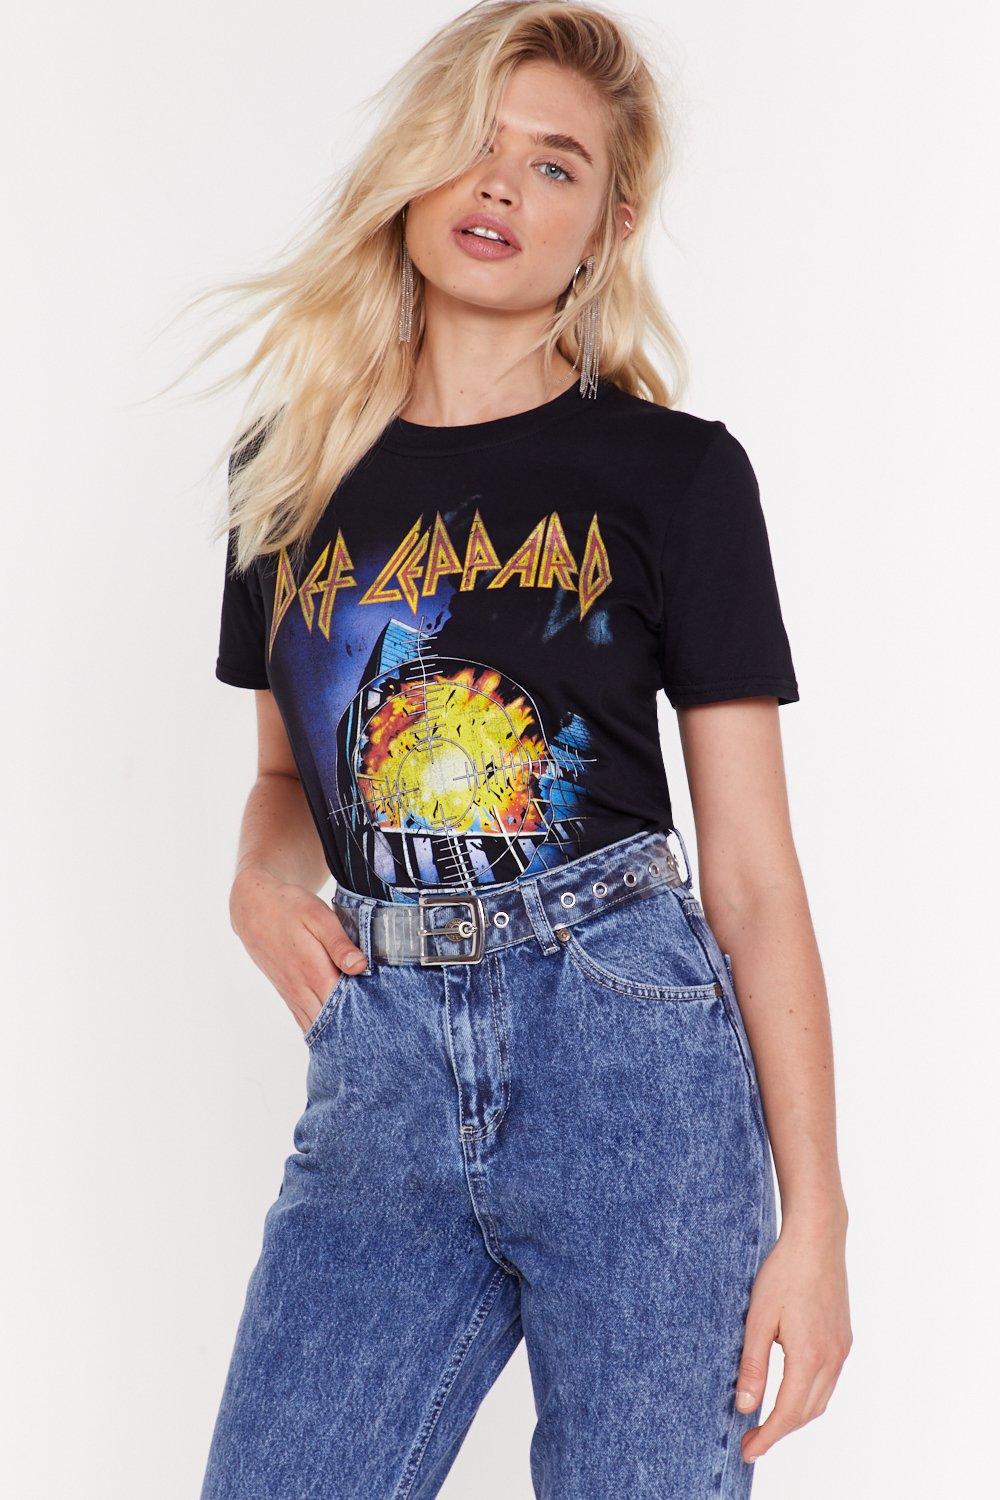 Def Leppard Pyromania Graphic Band Tee | Nasty Gal